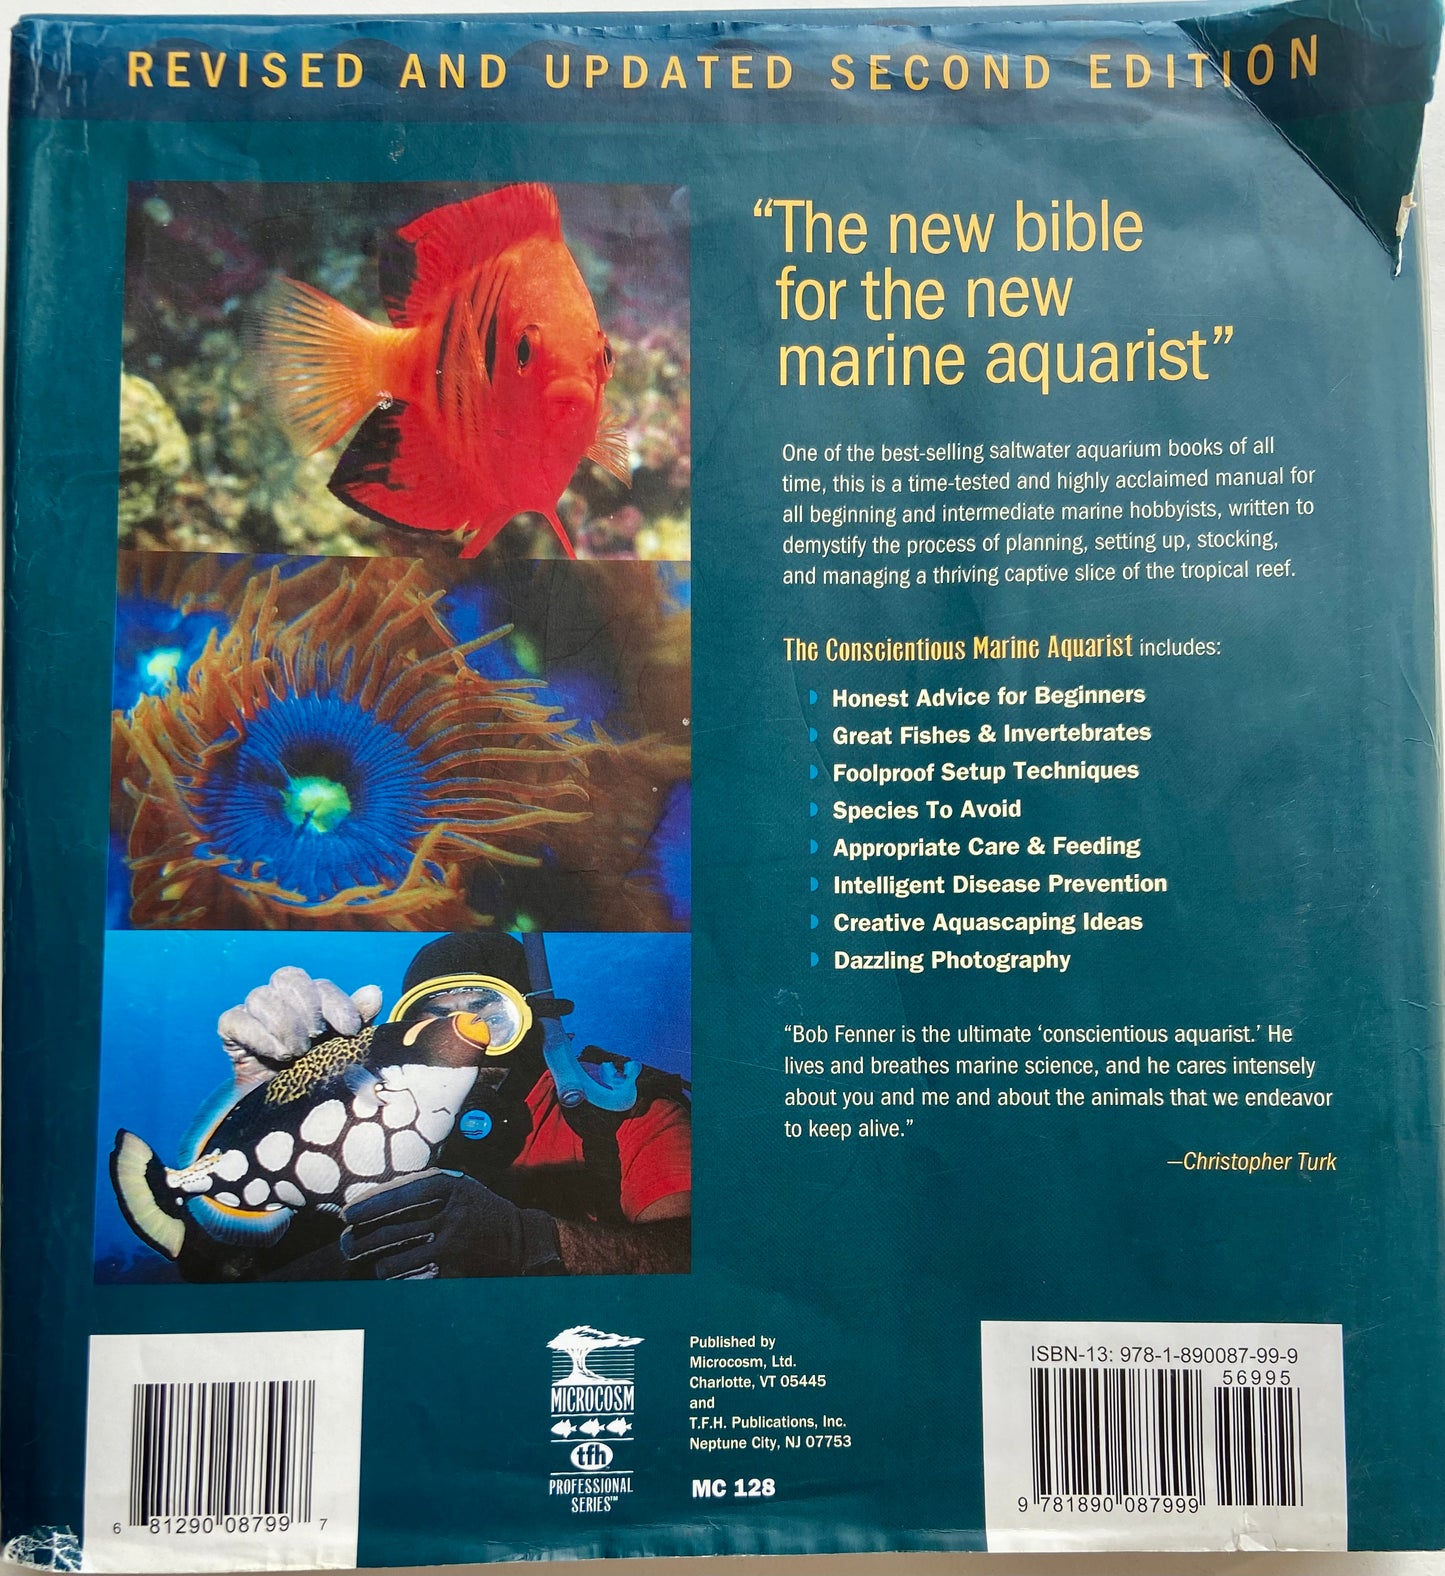 The Conscientious Marine Aquarist: A Commonsense Handbook for Successful Saltwater Hobbyists (Microcosm/T.F.H. Professional)